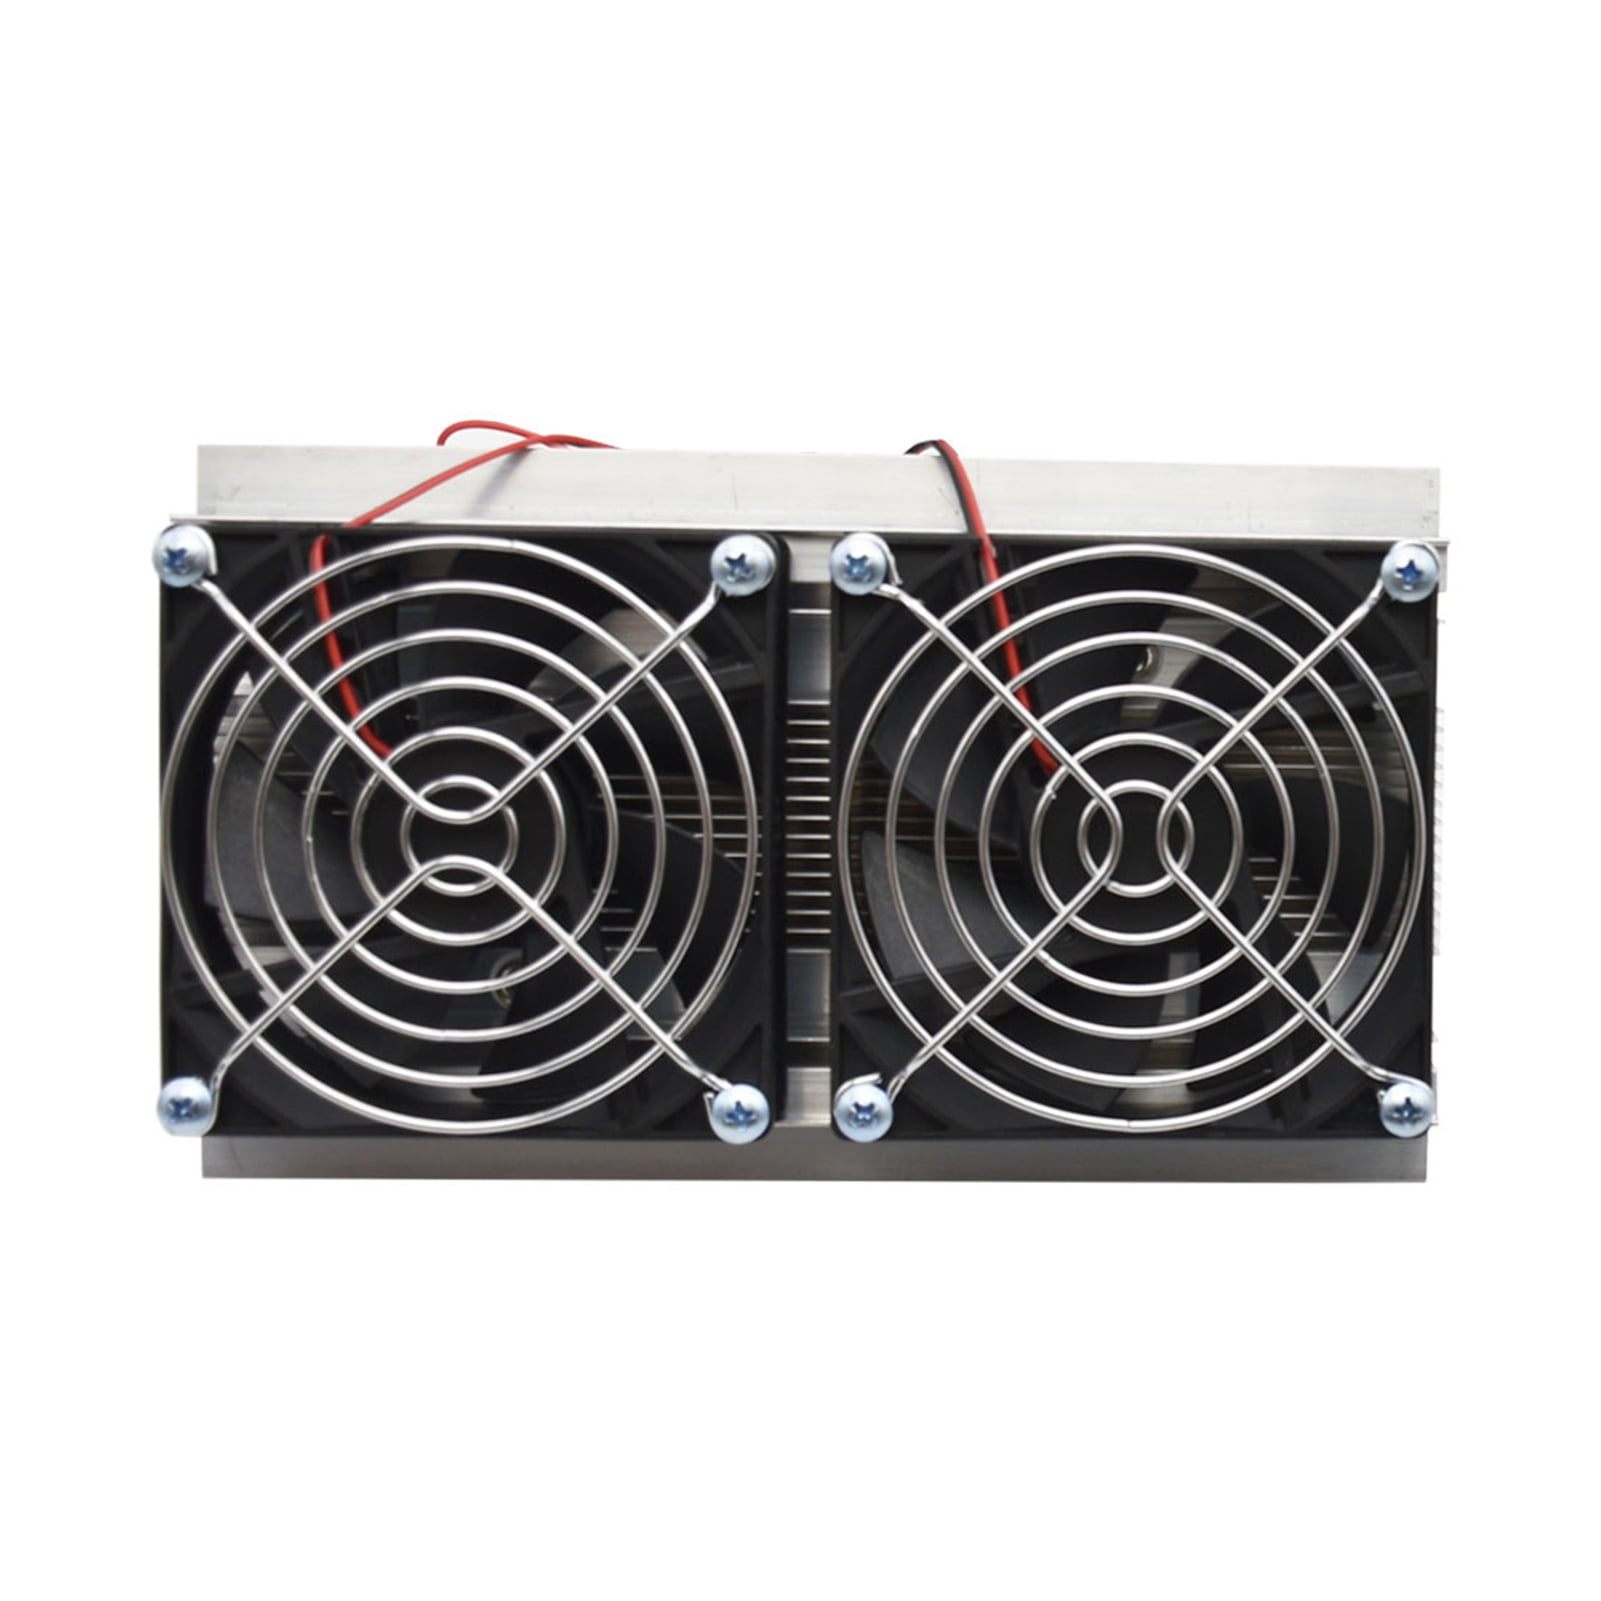 Durable Thermoelectric Peltier Refrigeration Cooling System Kit Semiconductor Cooler Large Radiator Cold Conduction Module Double Fans 